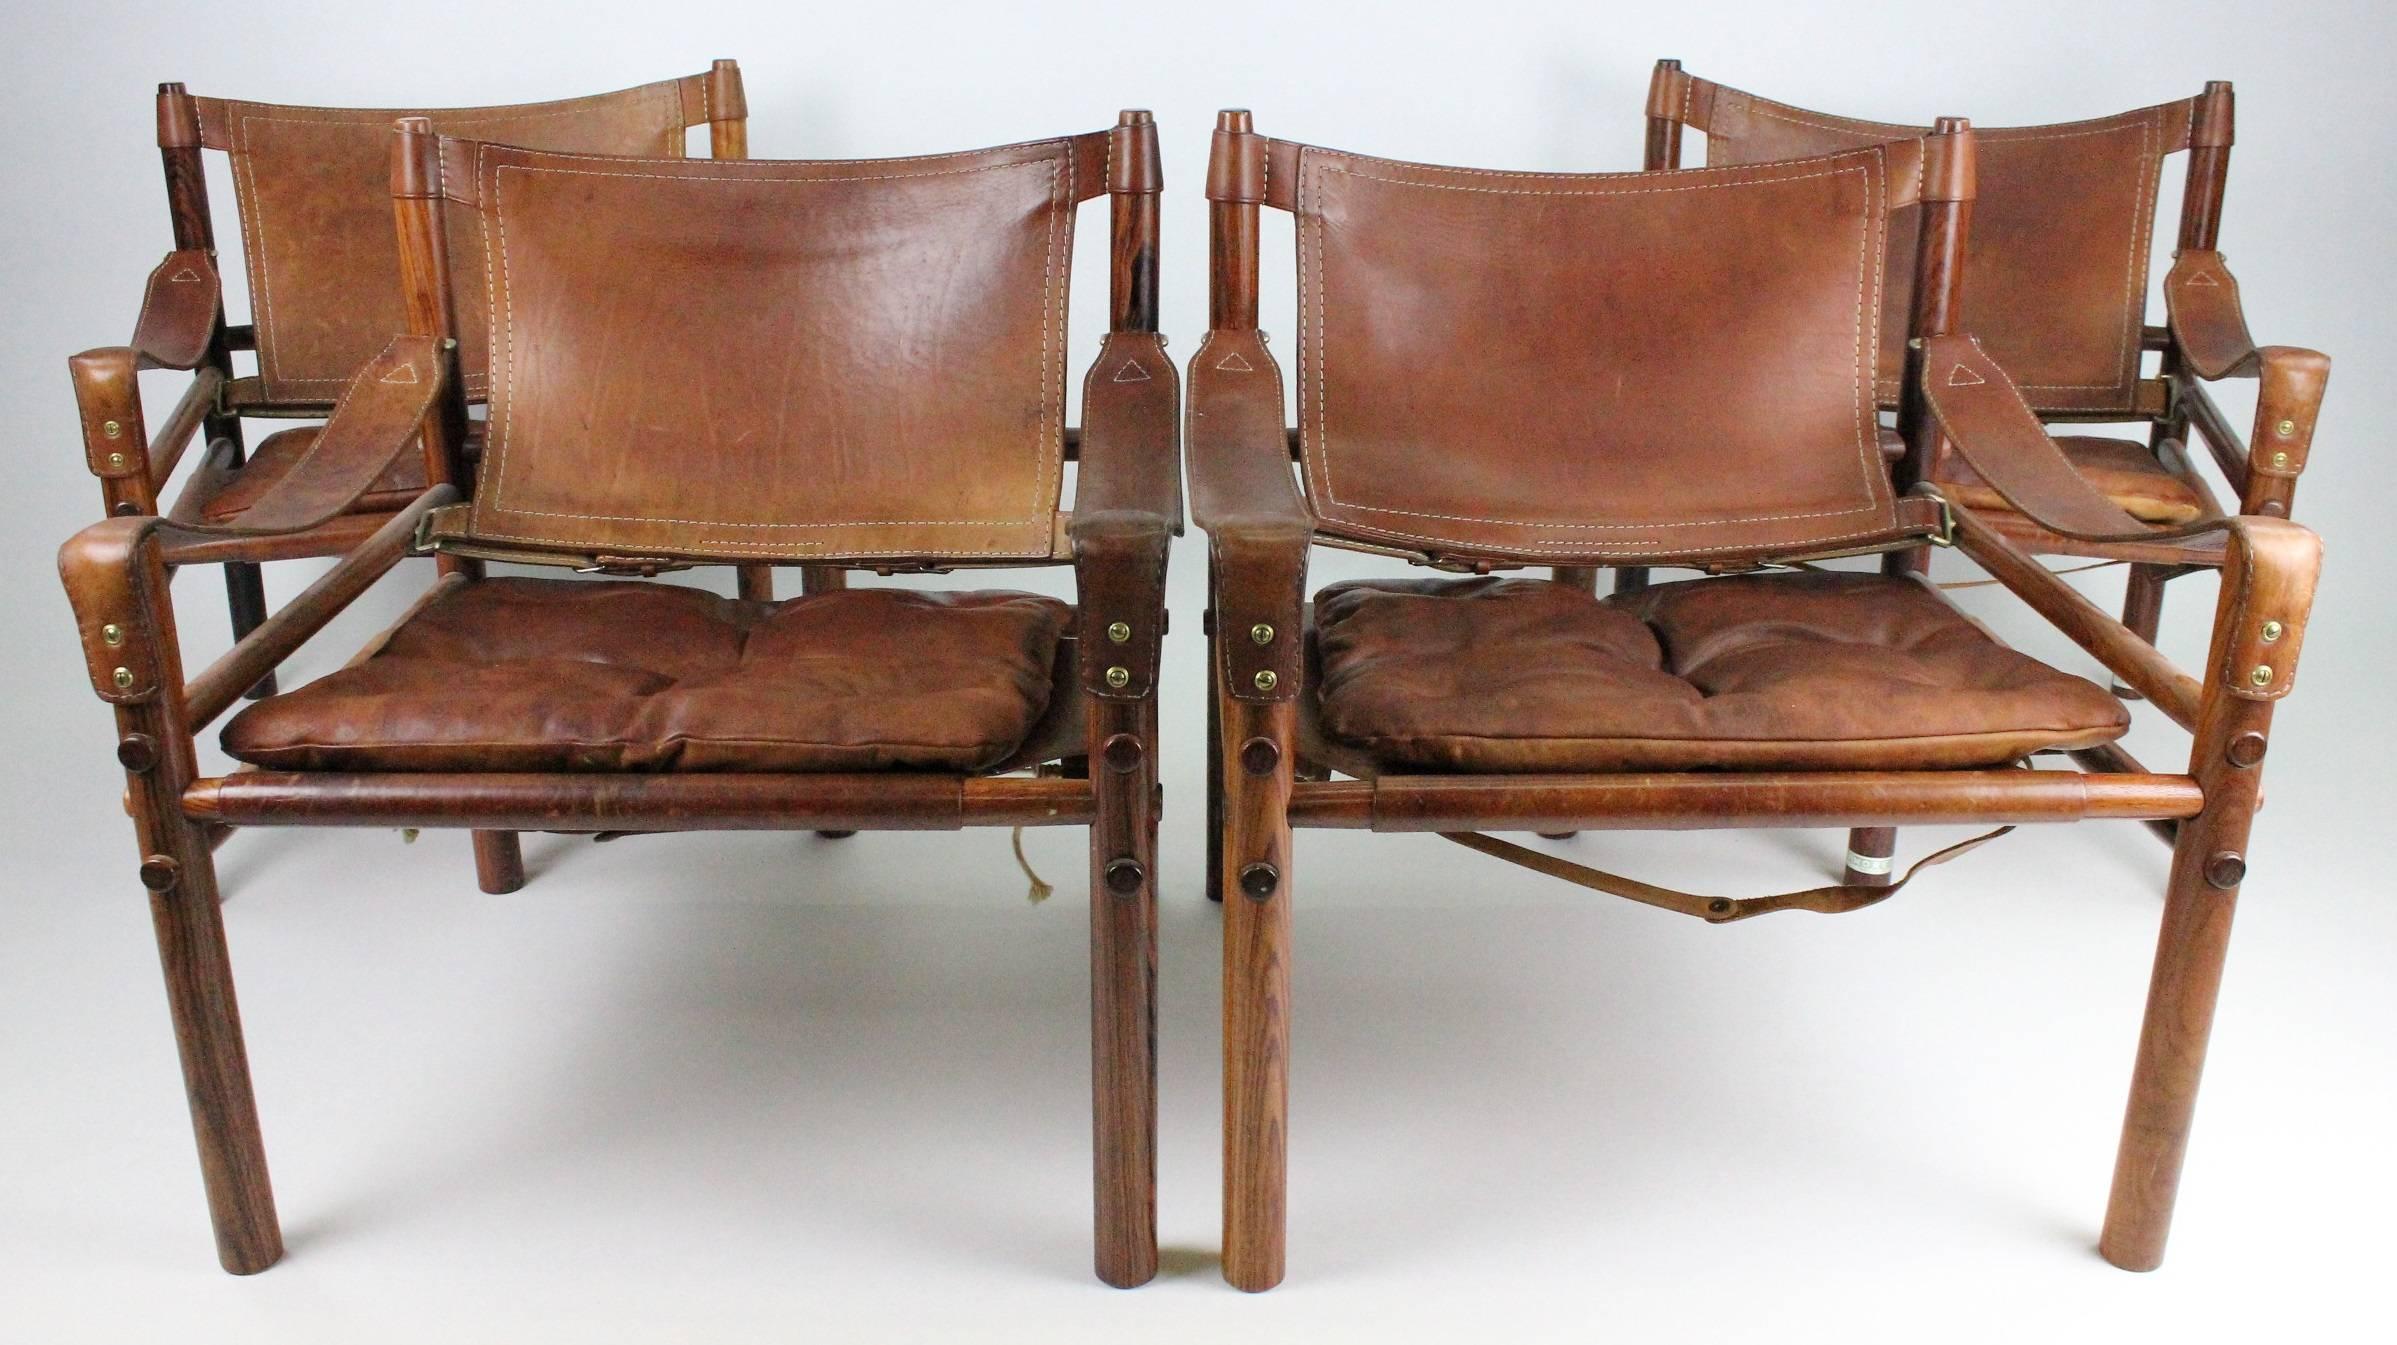 Two pairs of Sirocco Safari chairs. Price is for one pair but two pairs are available. These four Safari chairs have been together for 40 years standing together in the same room. They have the same color and patina. All four looks very much alike!